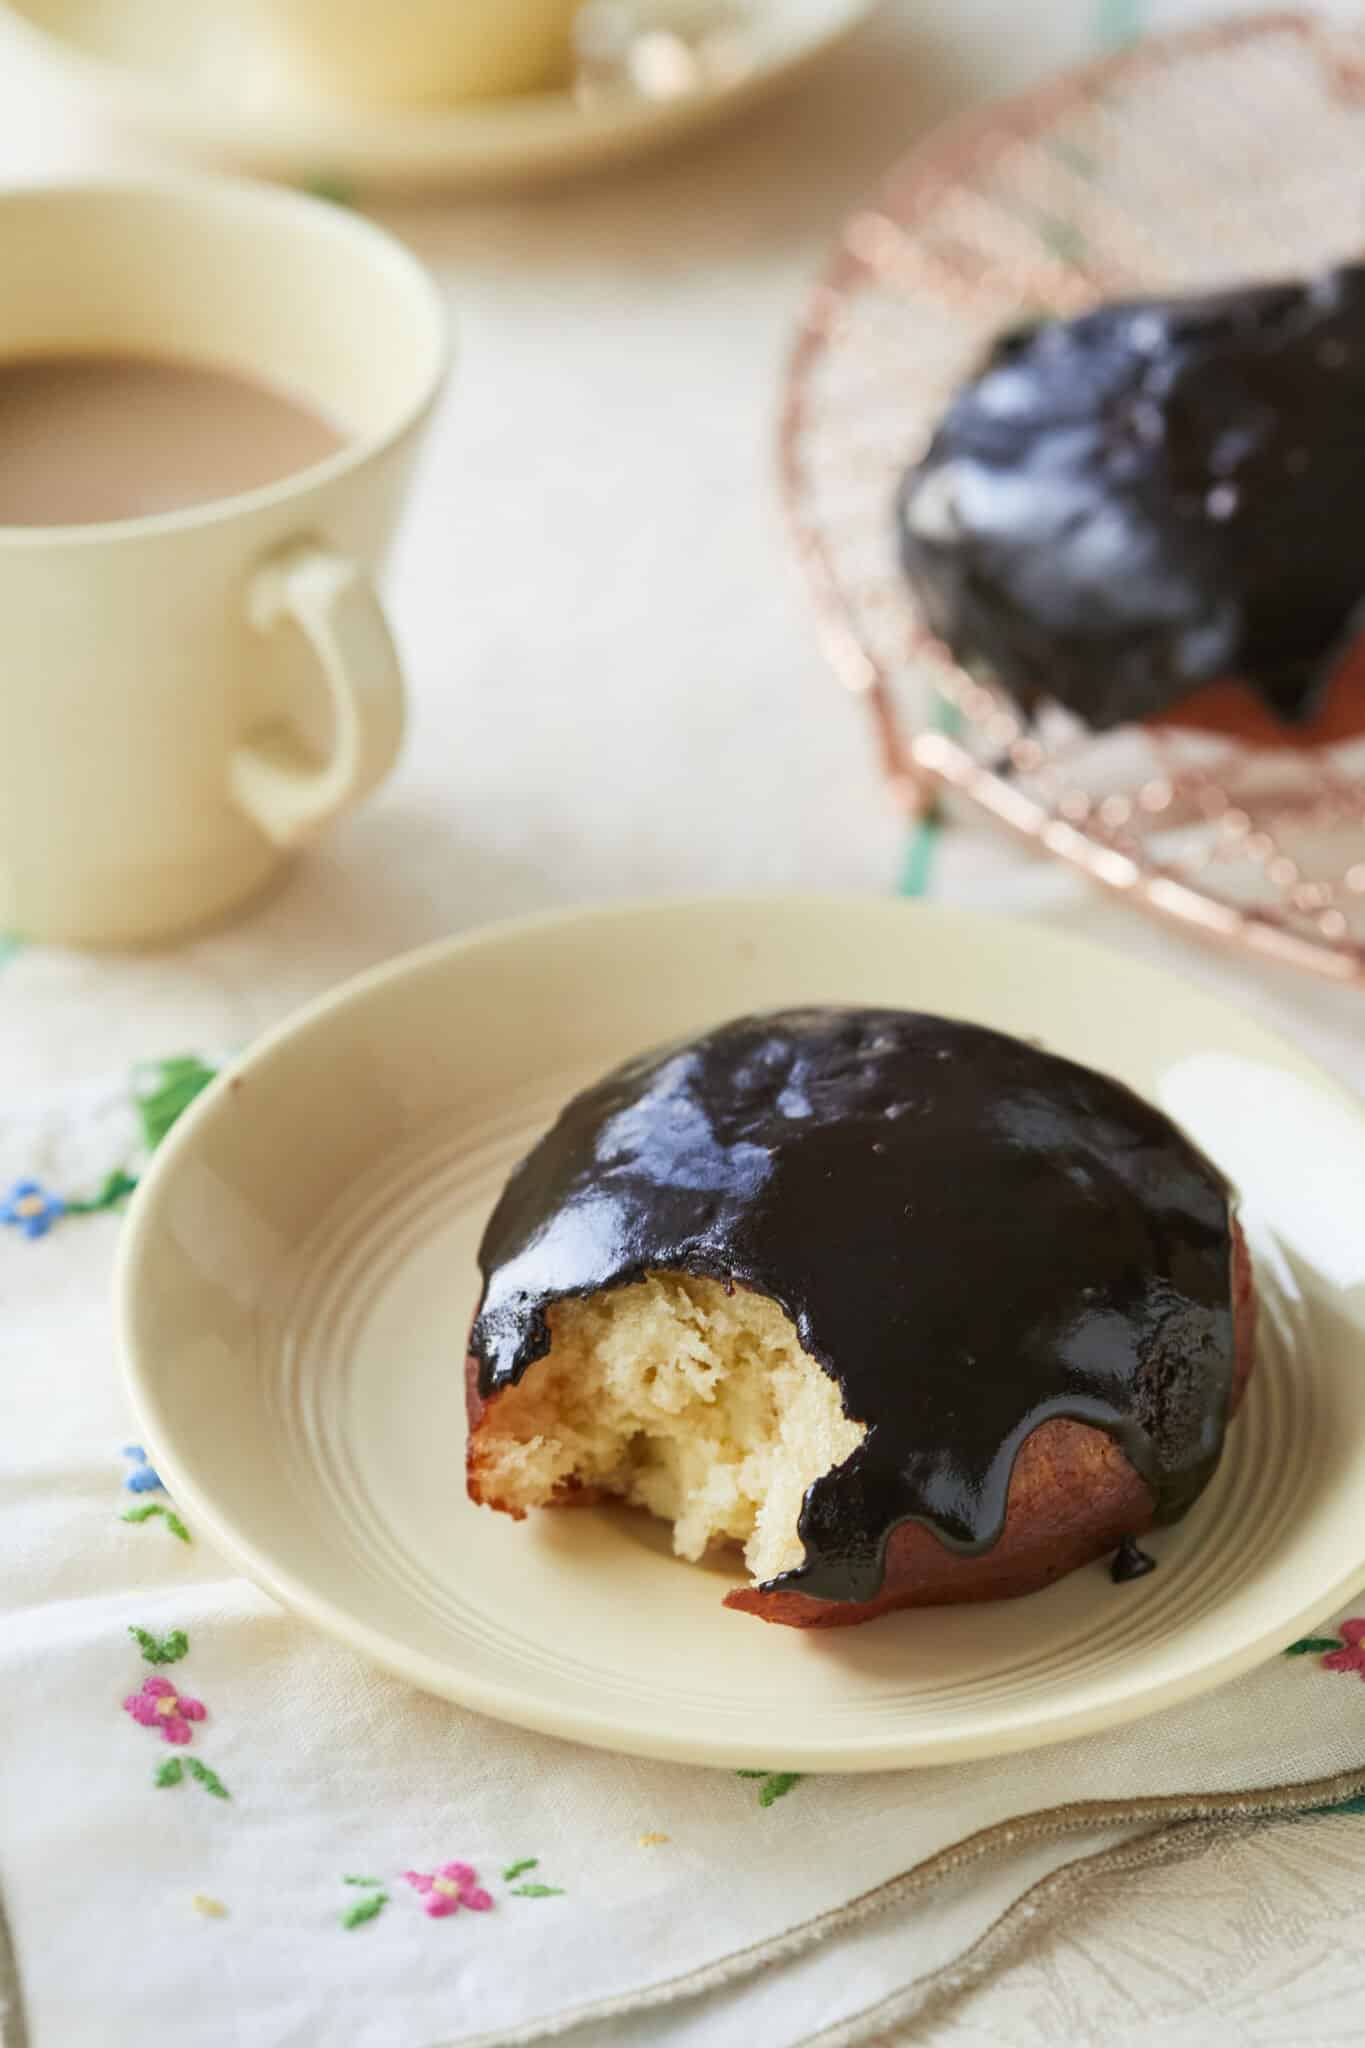 Boston Cream Donuts Recipe showing donut center with tea by side